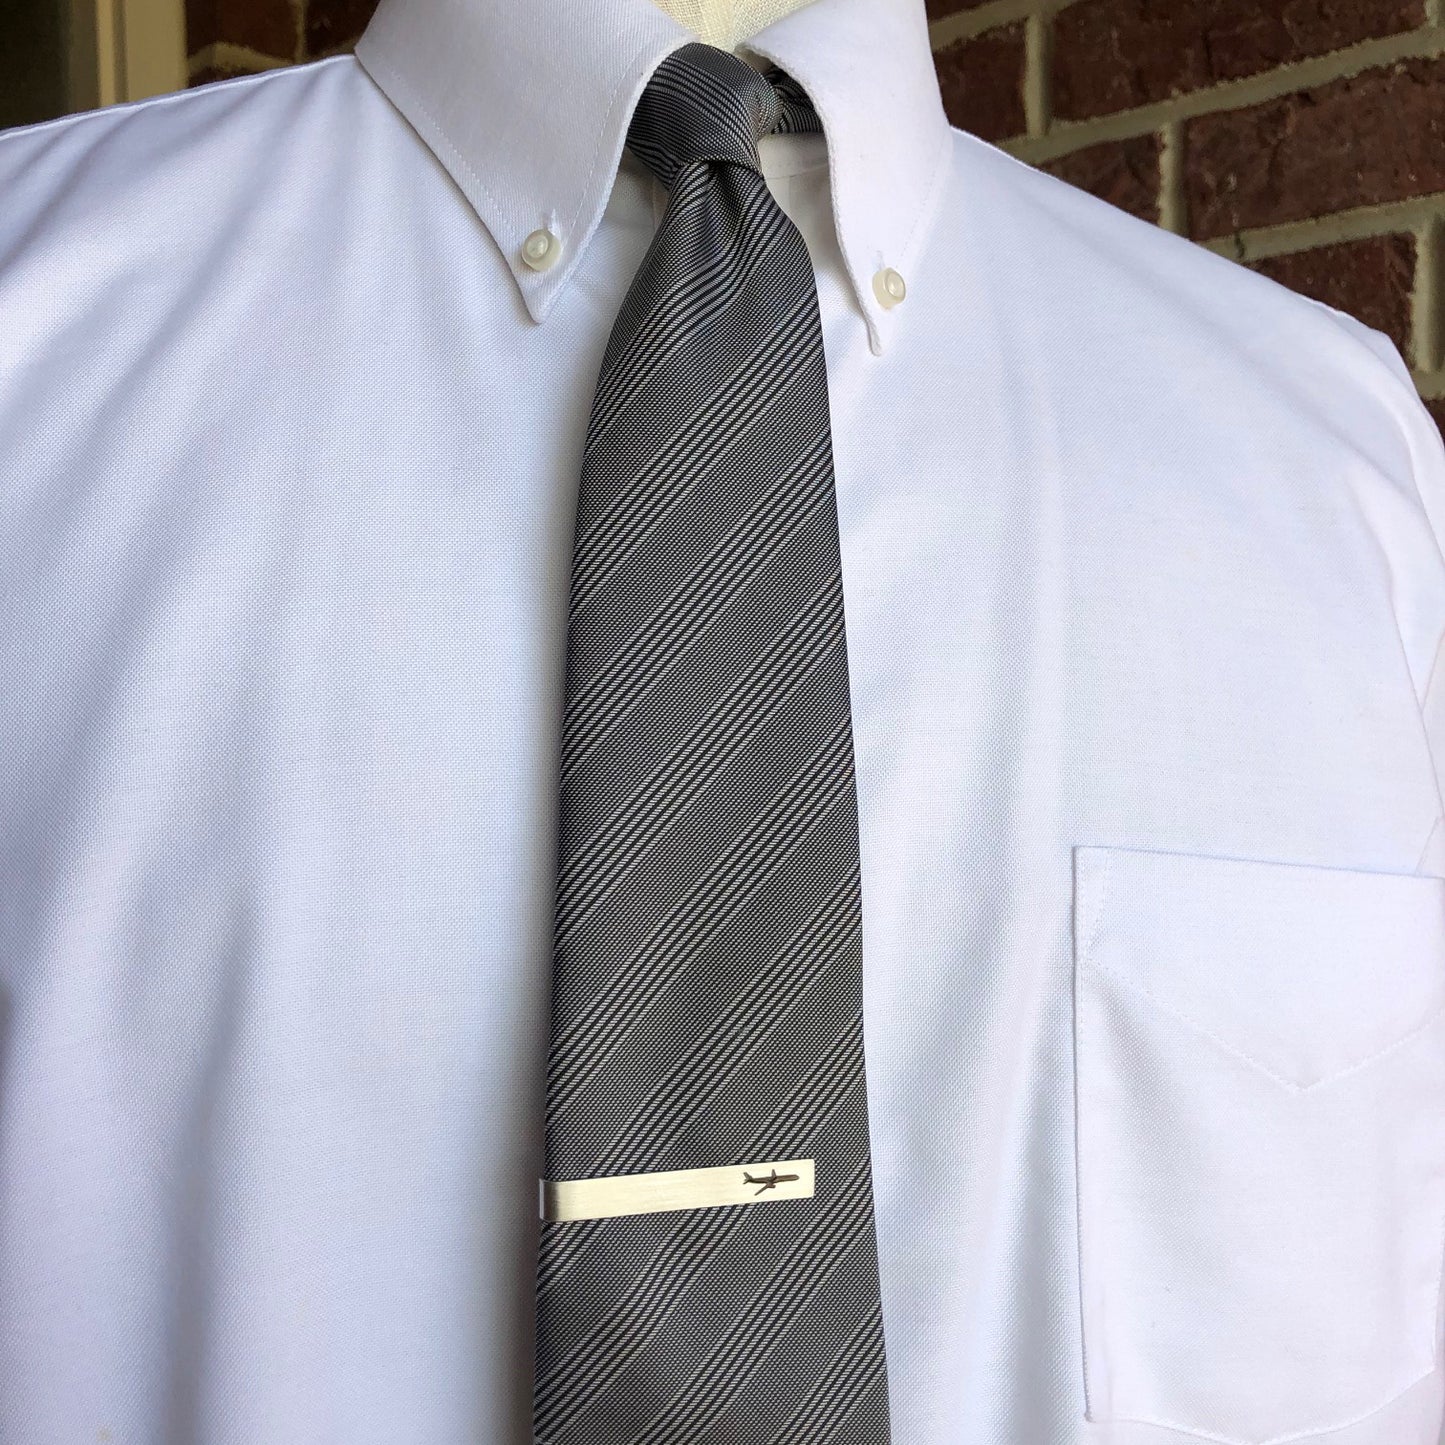 Silver Jumbo Jet Tie Bar Pilot Tie Clip Airlines Plane Flying Pilot Boyfriend Dad Gifts Very Cool